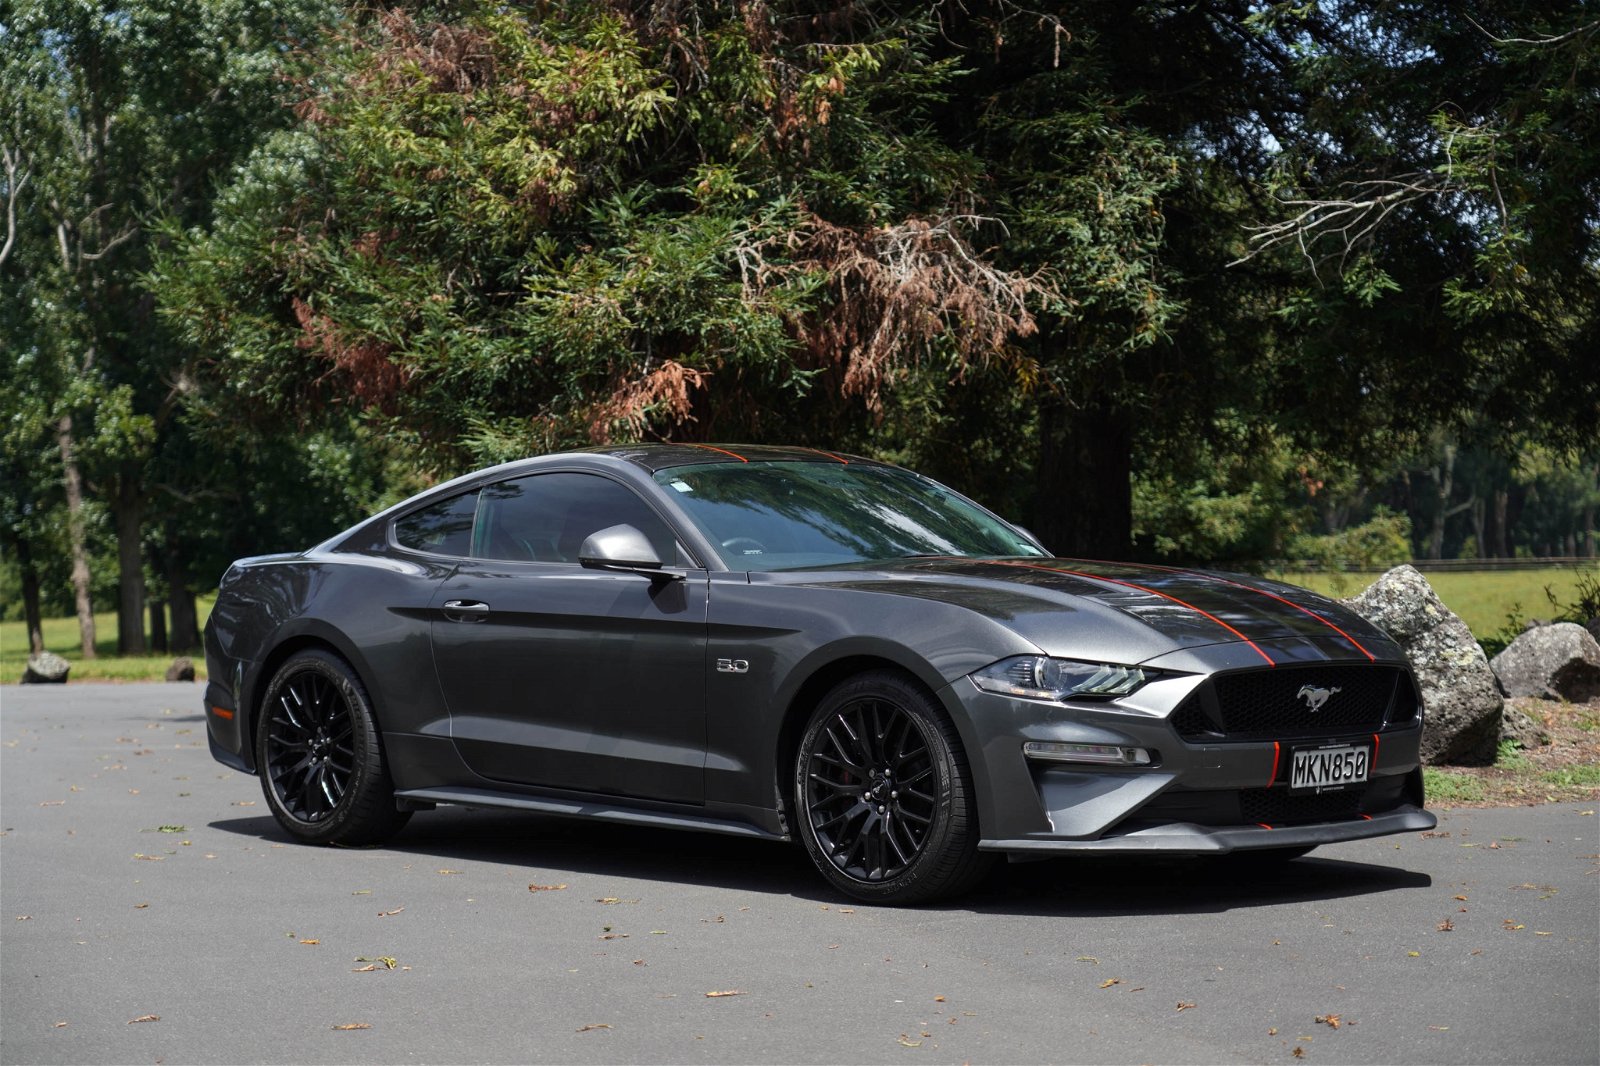 2019 Ford Mustang GT 5.0 V8 Petrol 10A 2Dr Coupe